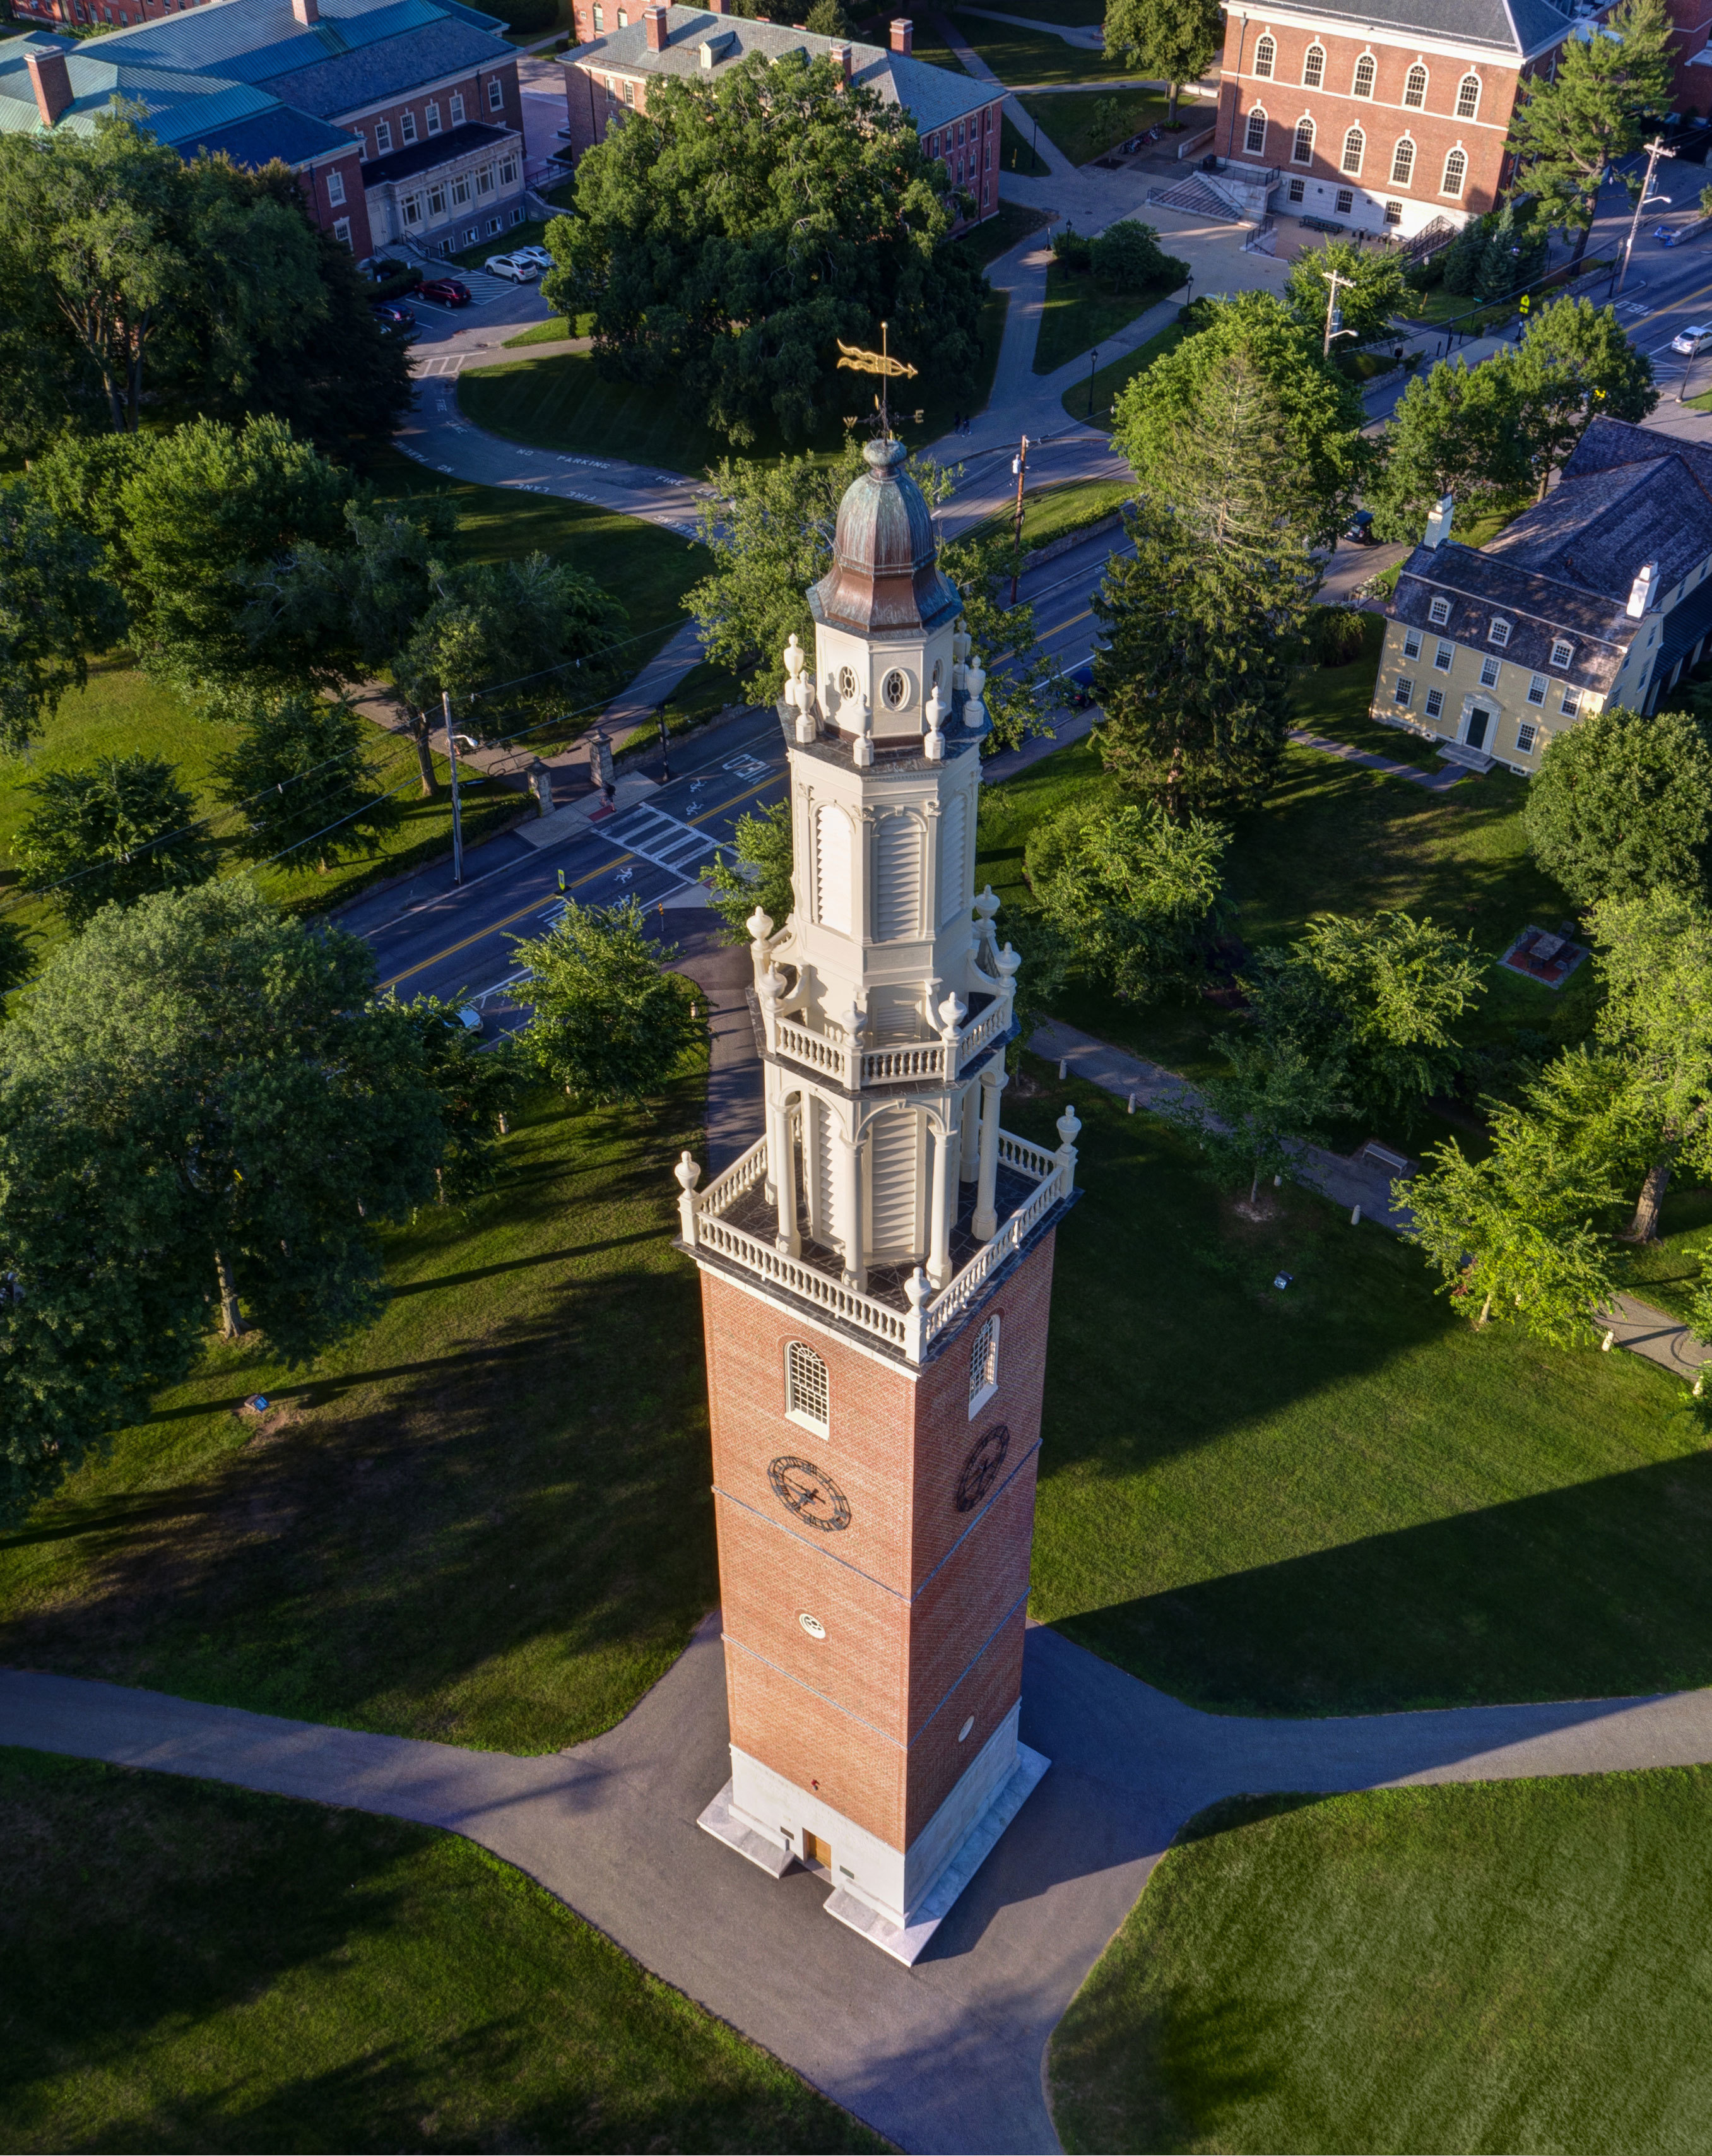 Phillips Bell Tower